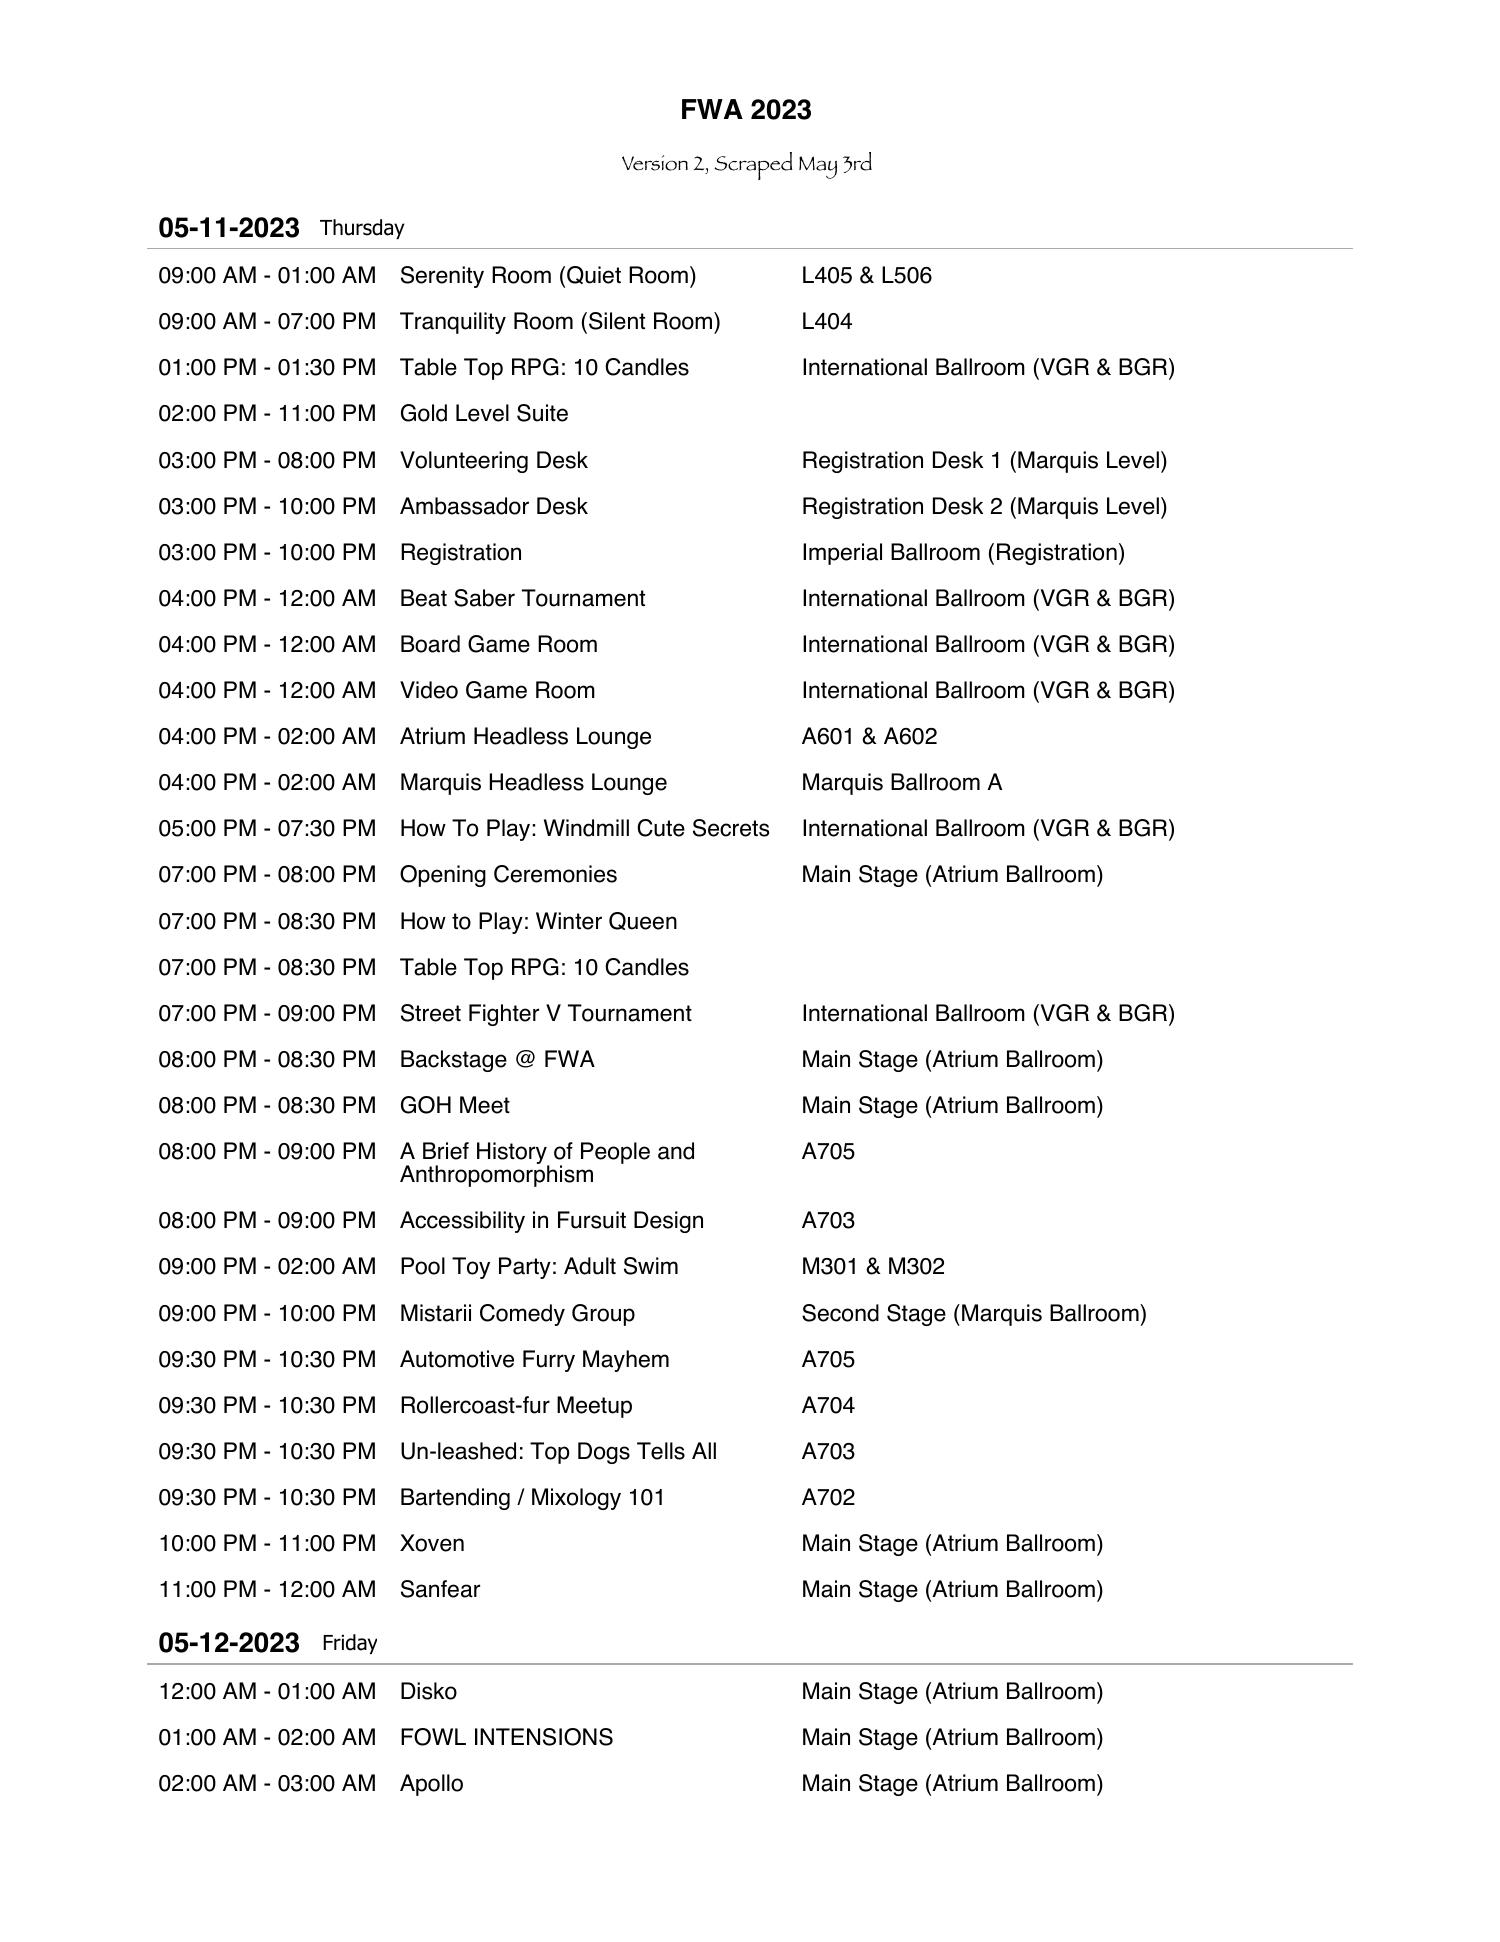 FWA 2023 Schedule Complete v2.pdf DocDroid